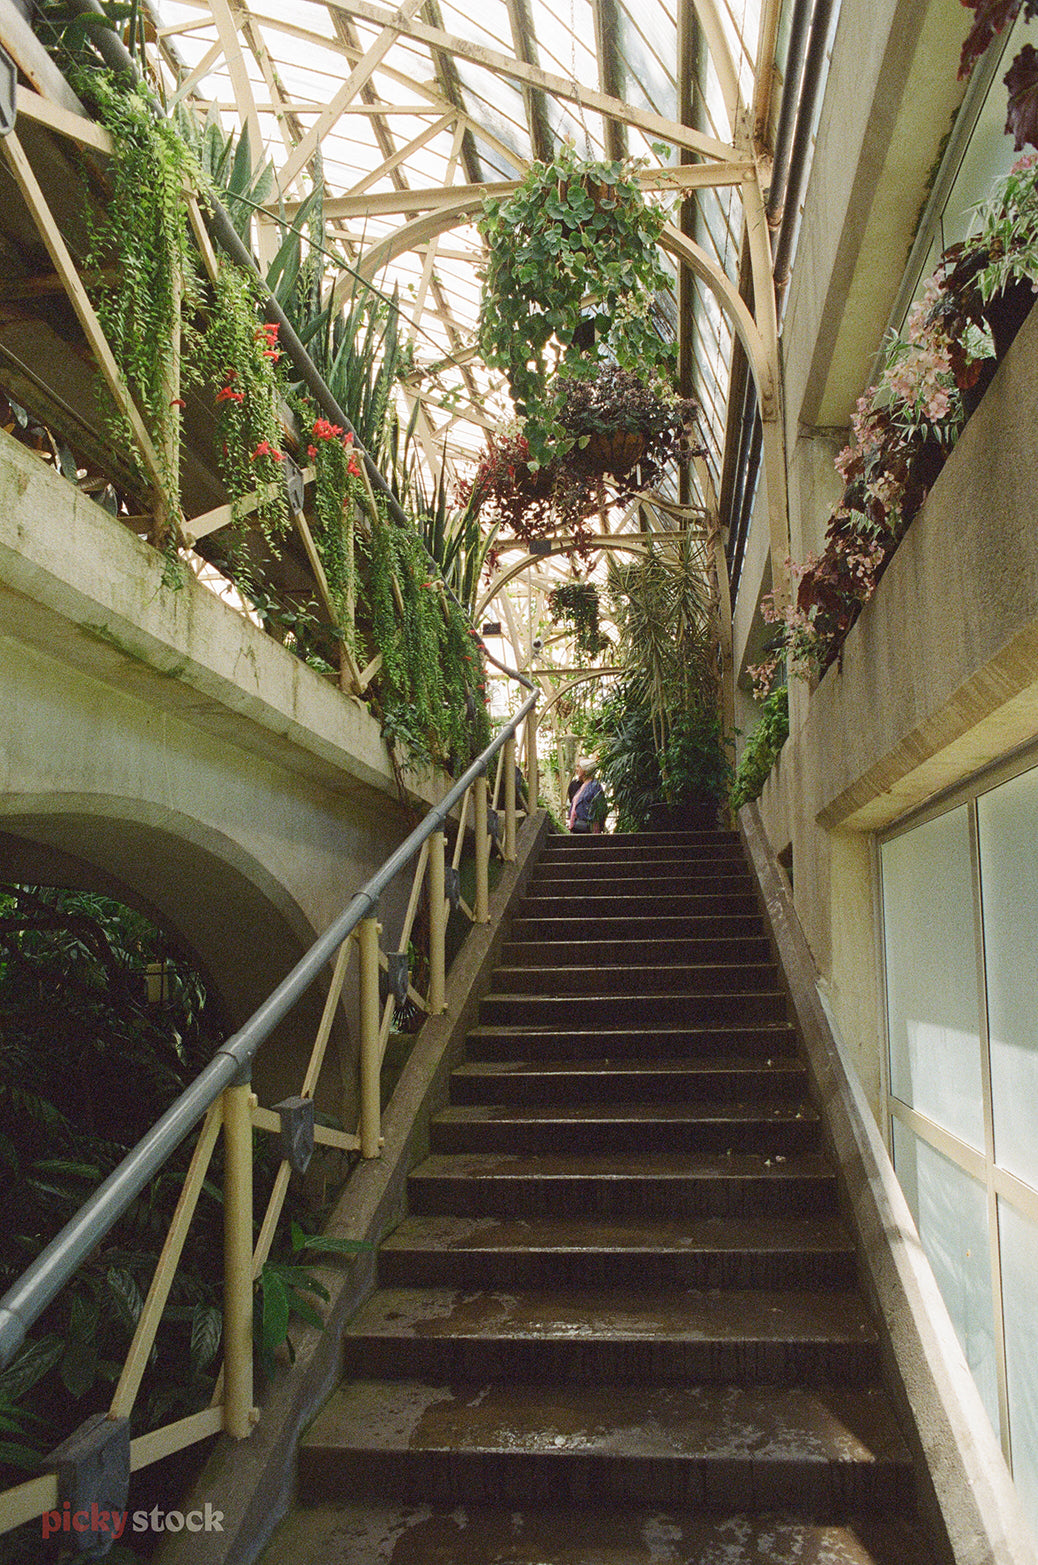 Looking up the concrete steps towards plants in an old plant nursery. The lighting is green tinged, and the overall image has a grainy film grade over it. 